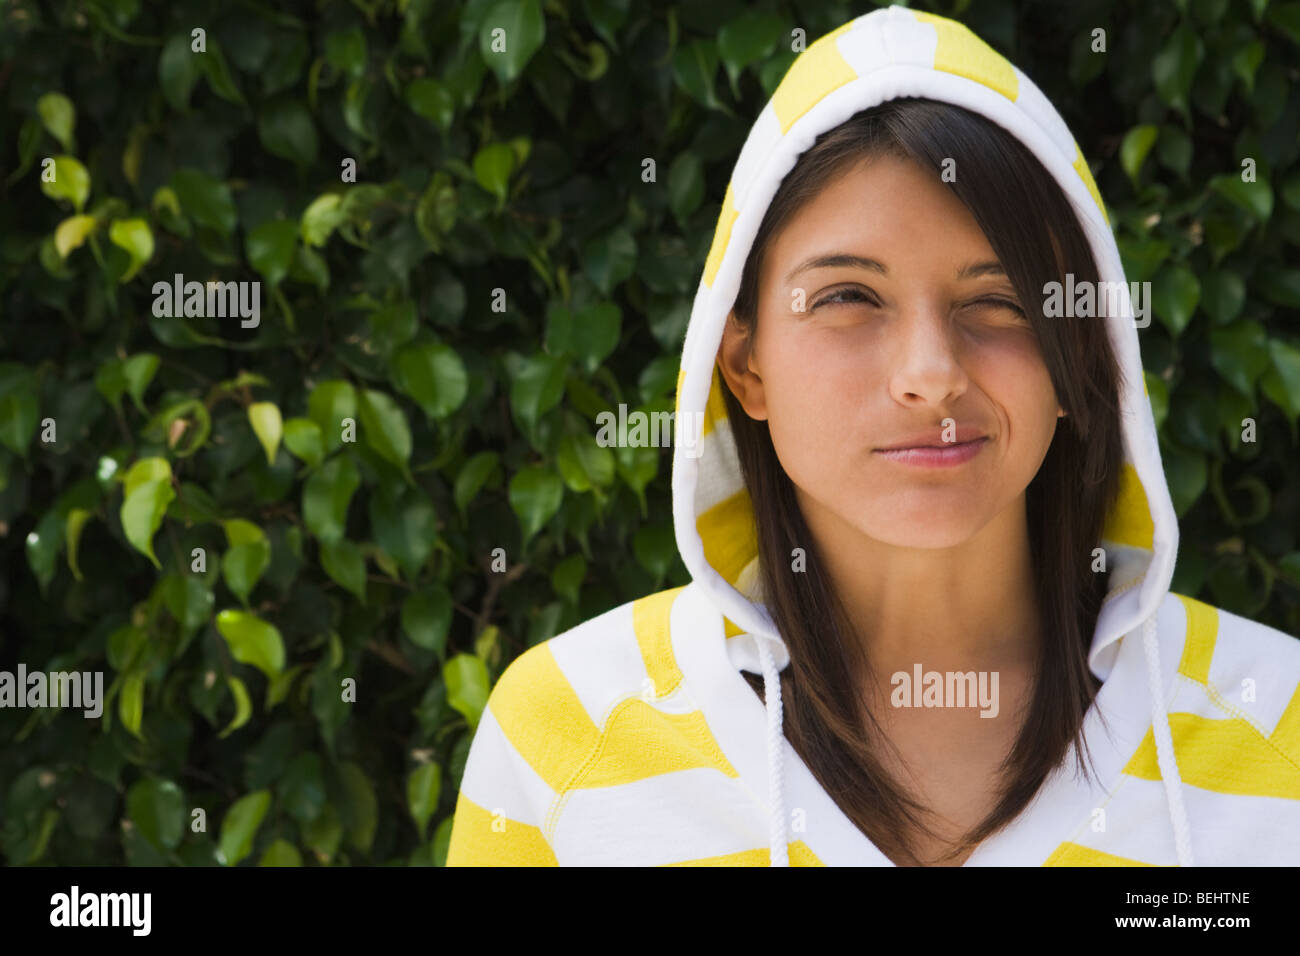 Teenage girl making a face Stock Photo